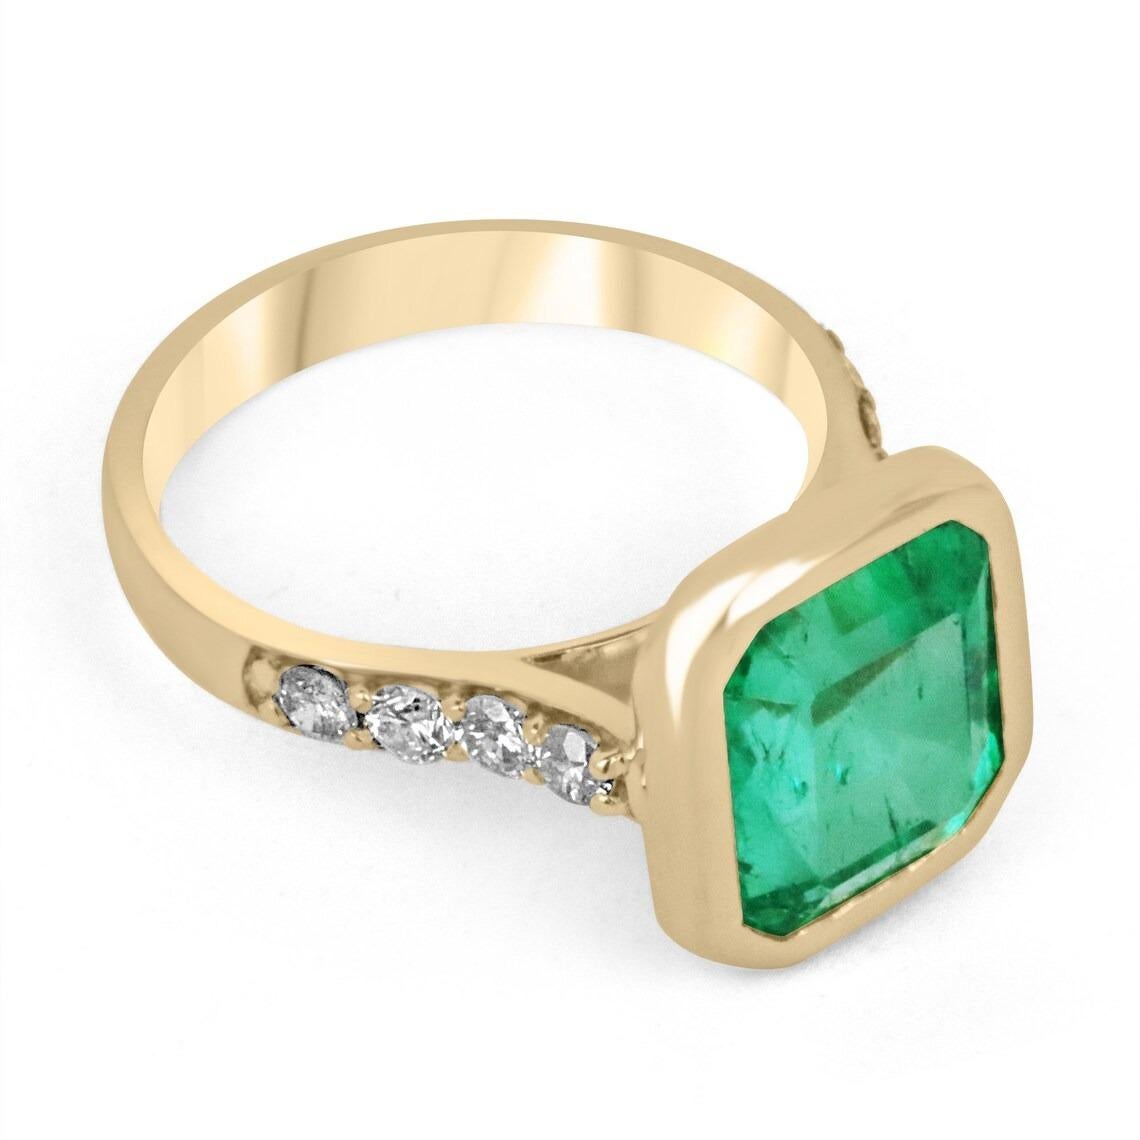 A remarkable AAA emerald and diamond engagement ring. The center stone showcases a striking natural Colombian emerald with superior characteristics such as its vivacious medium green color, excellent luster, and very good clarity. Natural internal